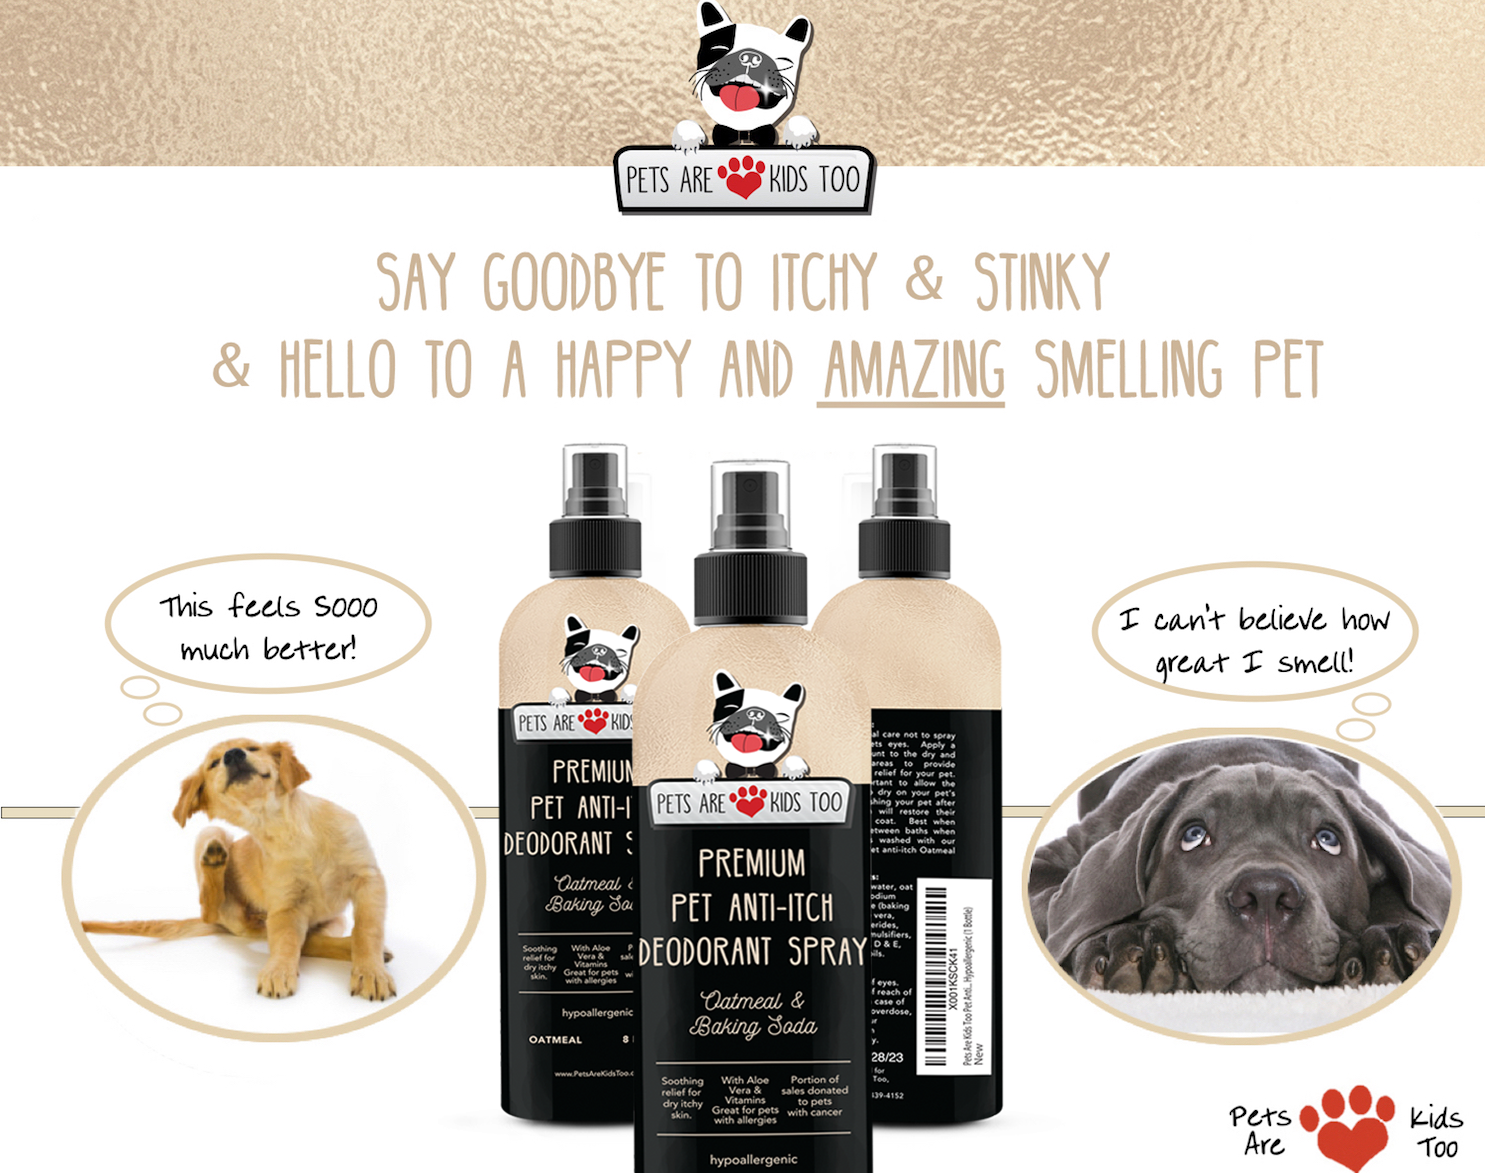 Say goodbye to itchy and stinky